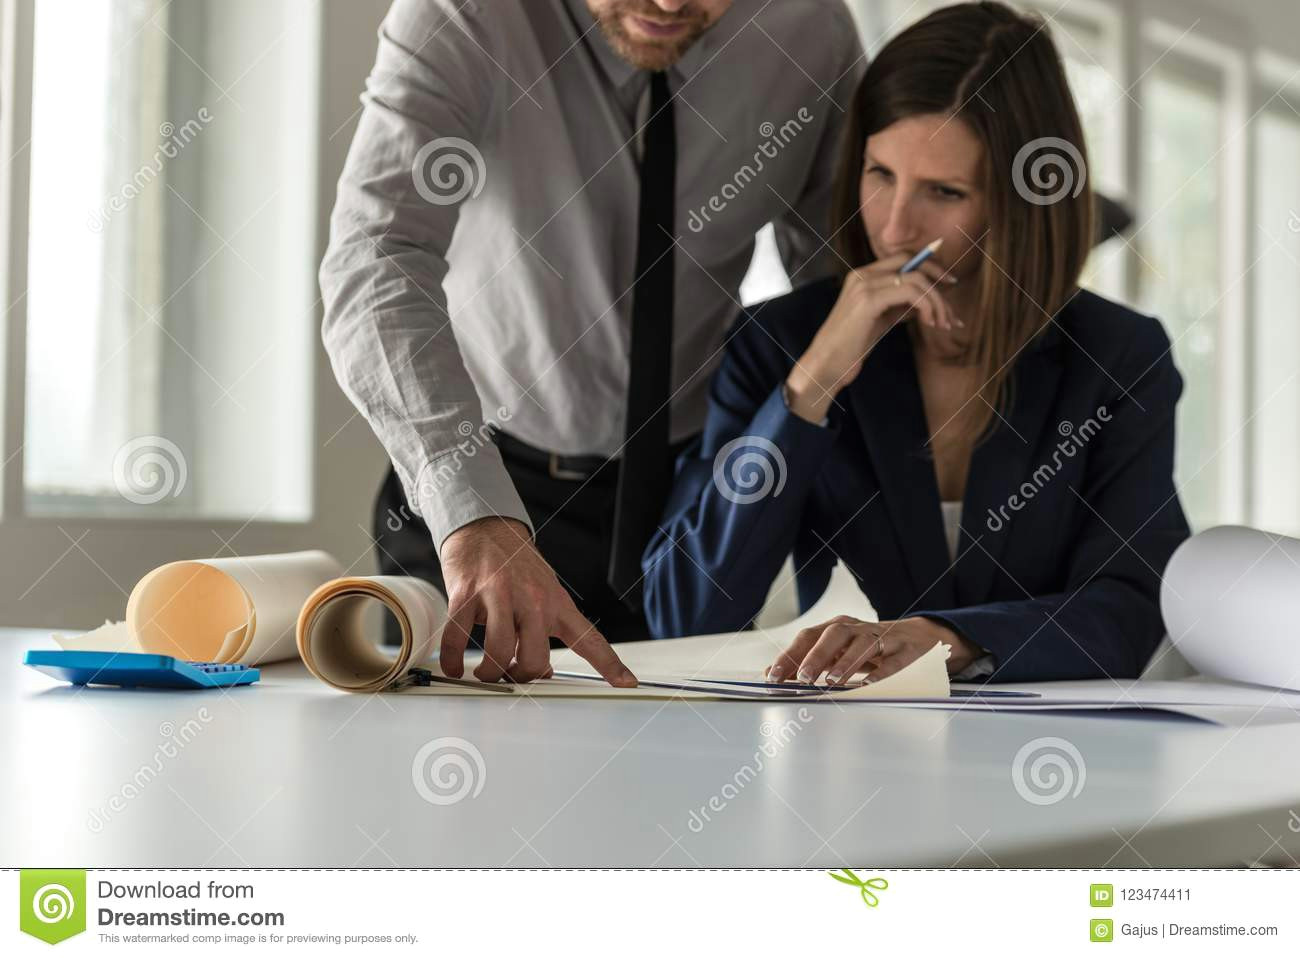 two architects discussing a drawing or blueprint